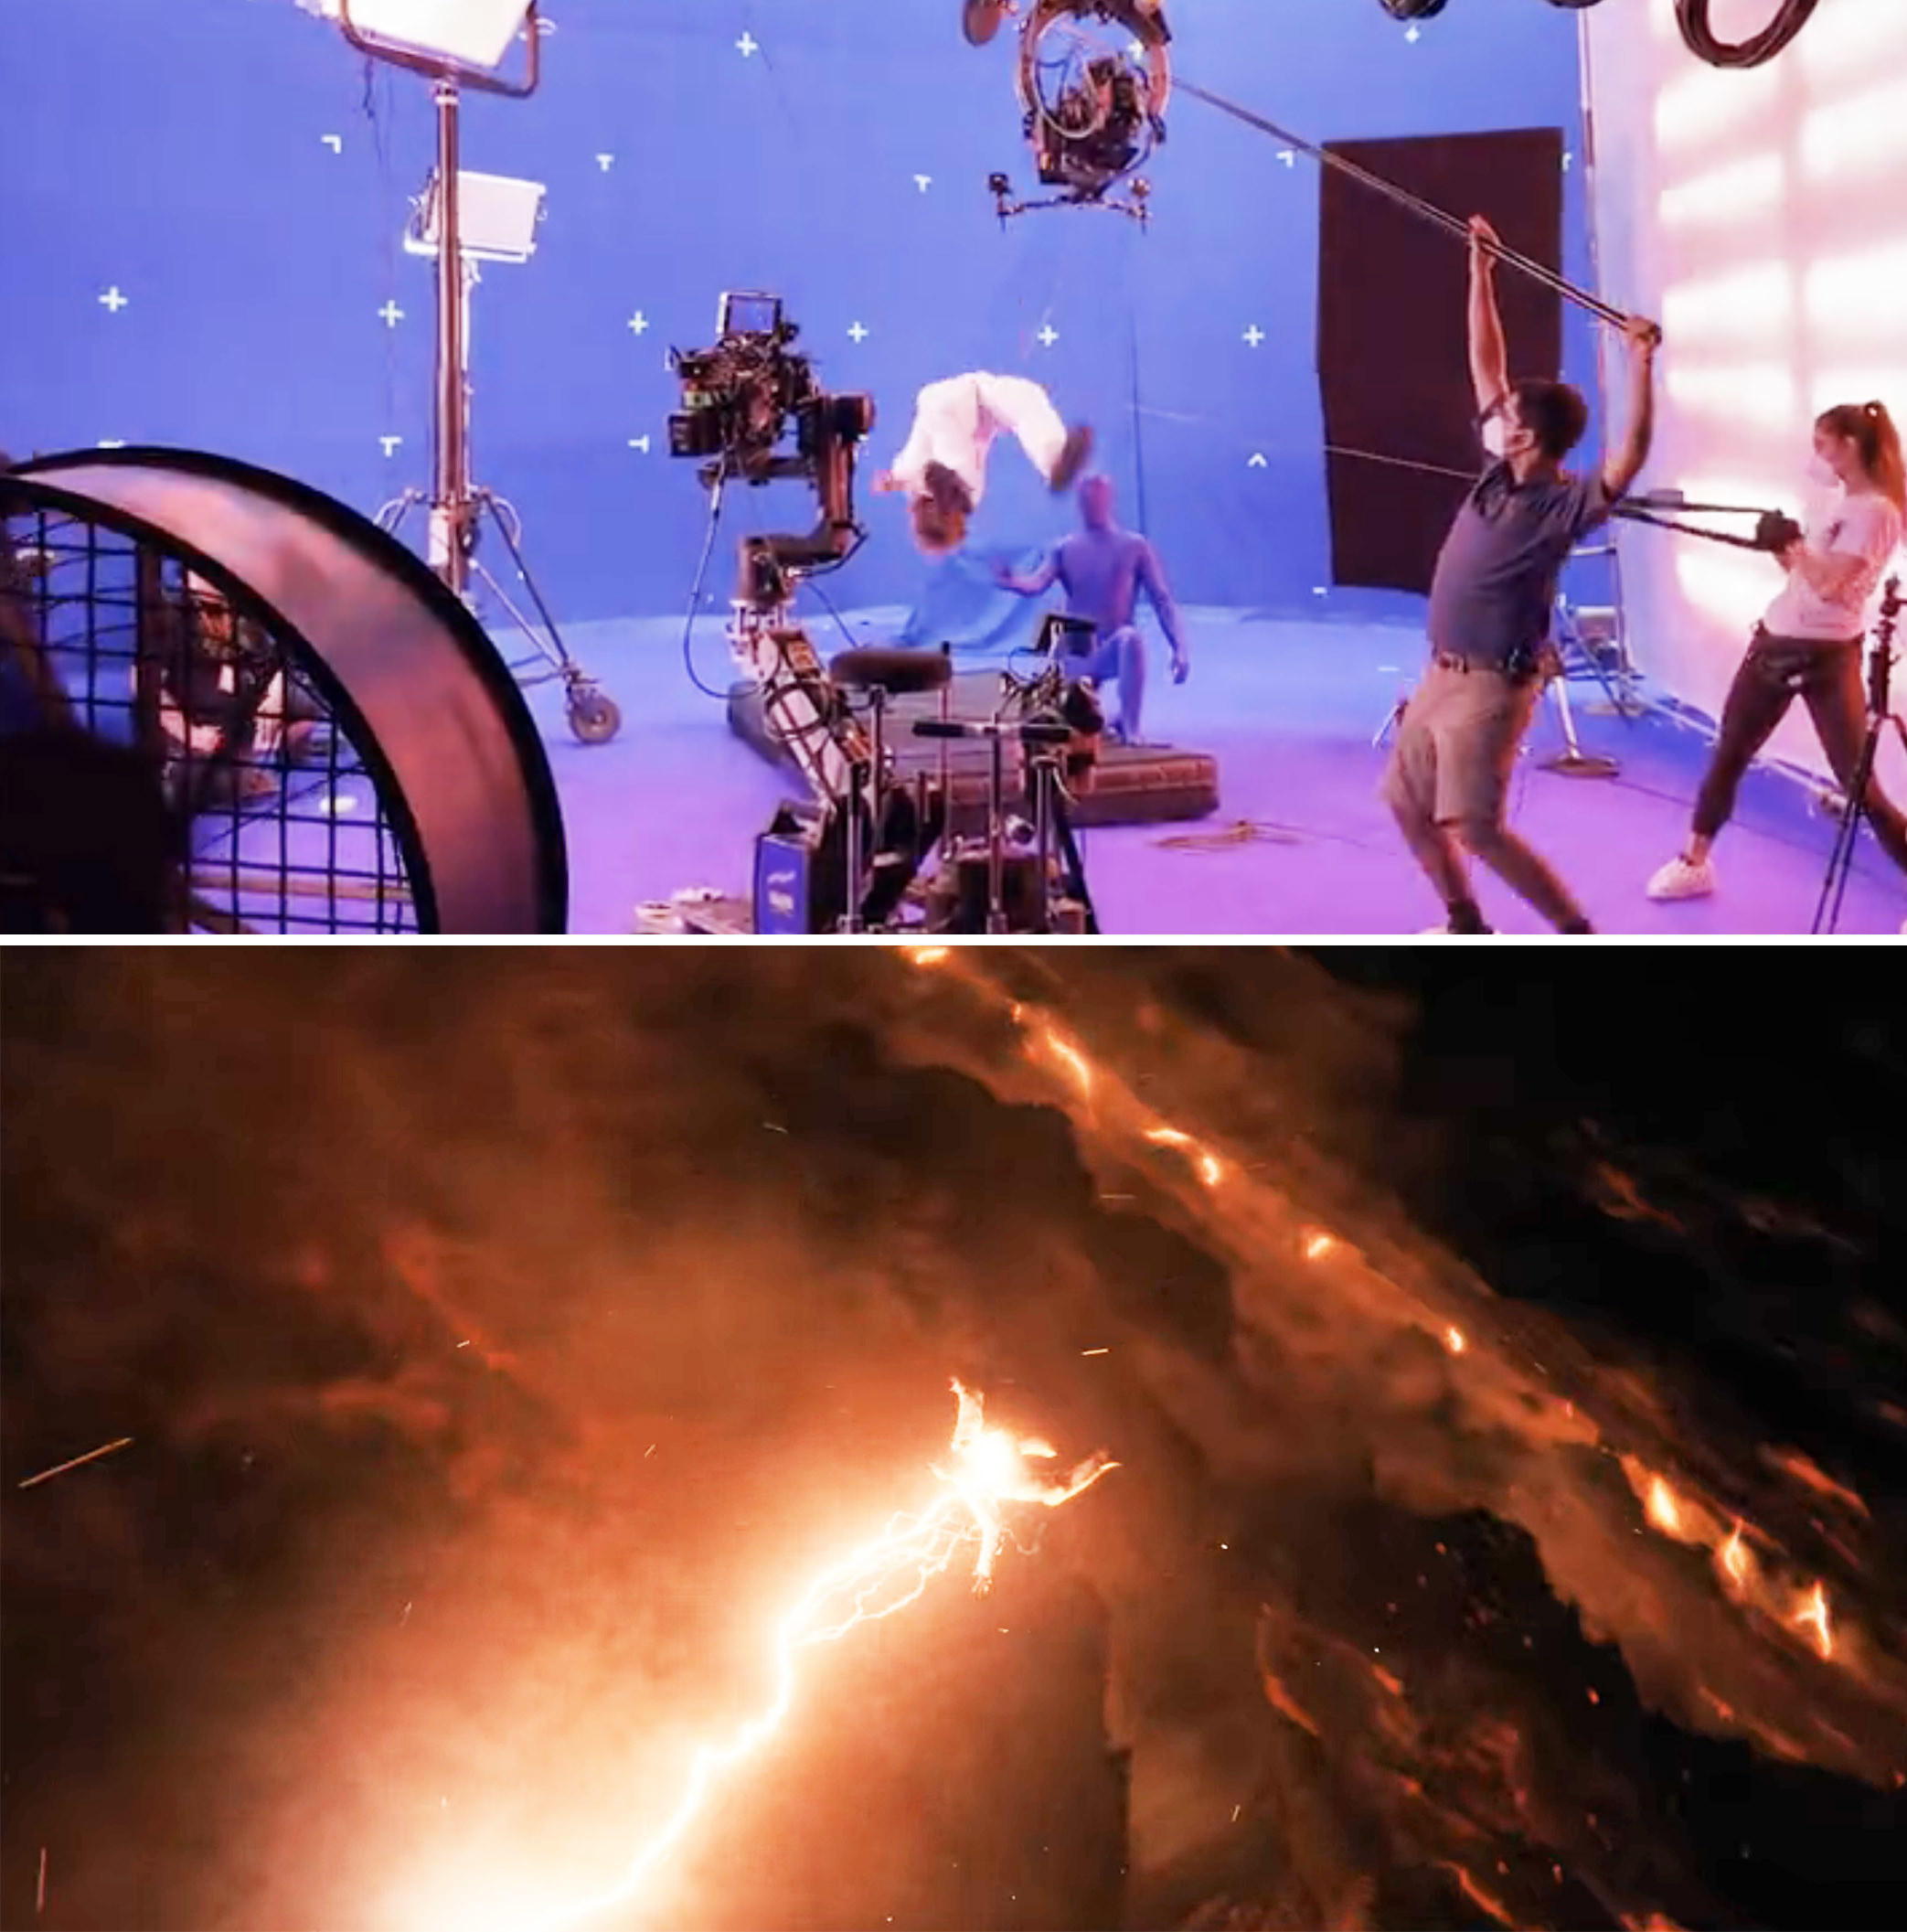 Jamie falling through the air behind the scenes vs One falling through the Upside Down